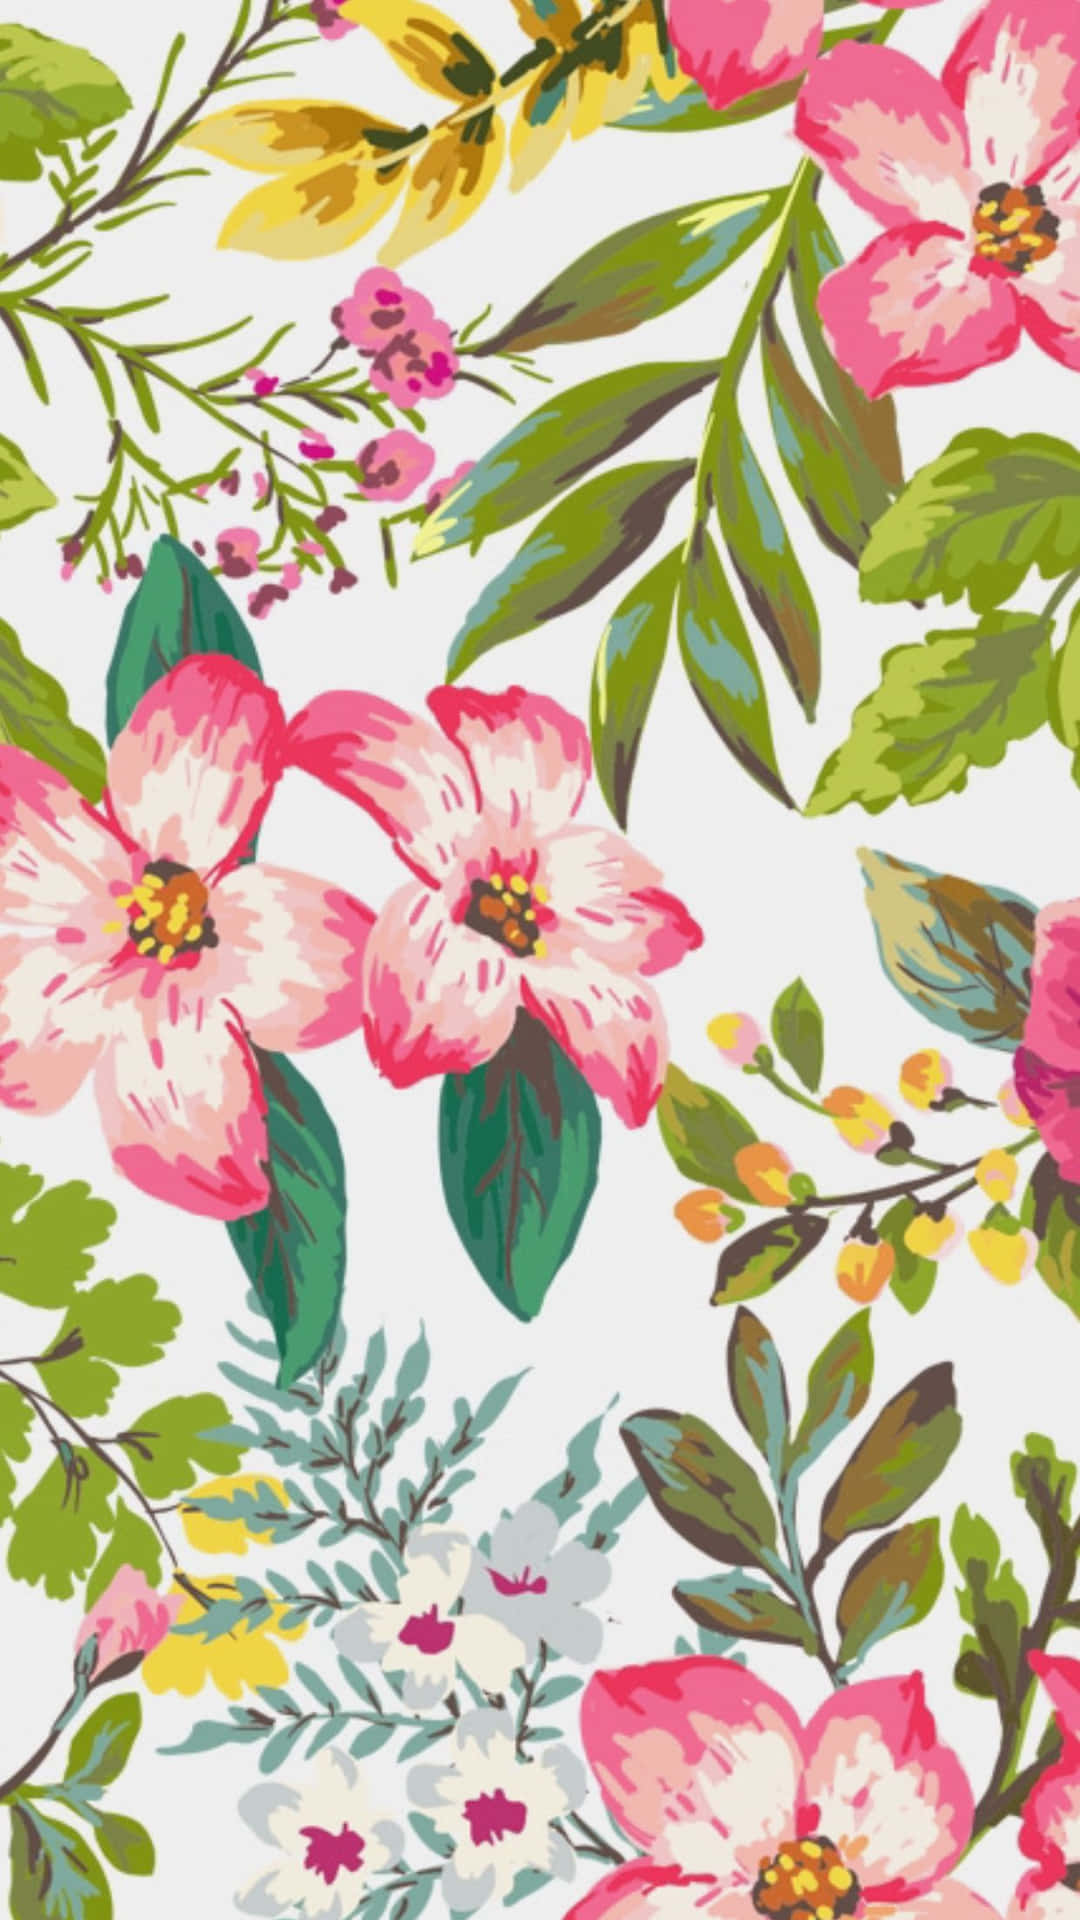 A Pink Floral Pattern With Leaves And Flowers Wallpaper